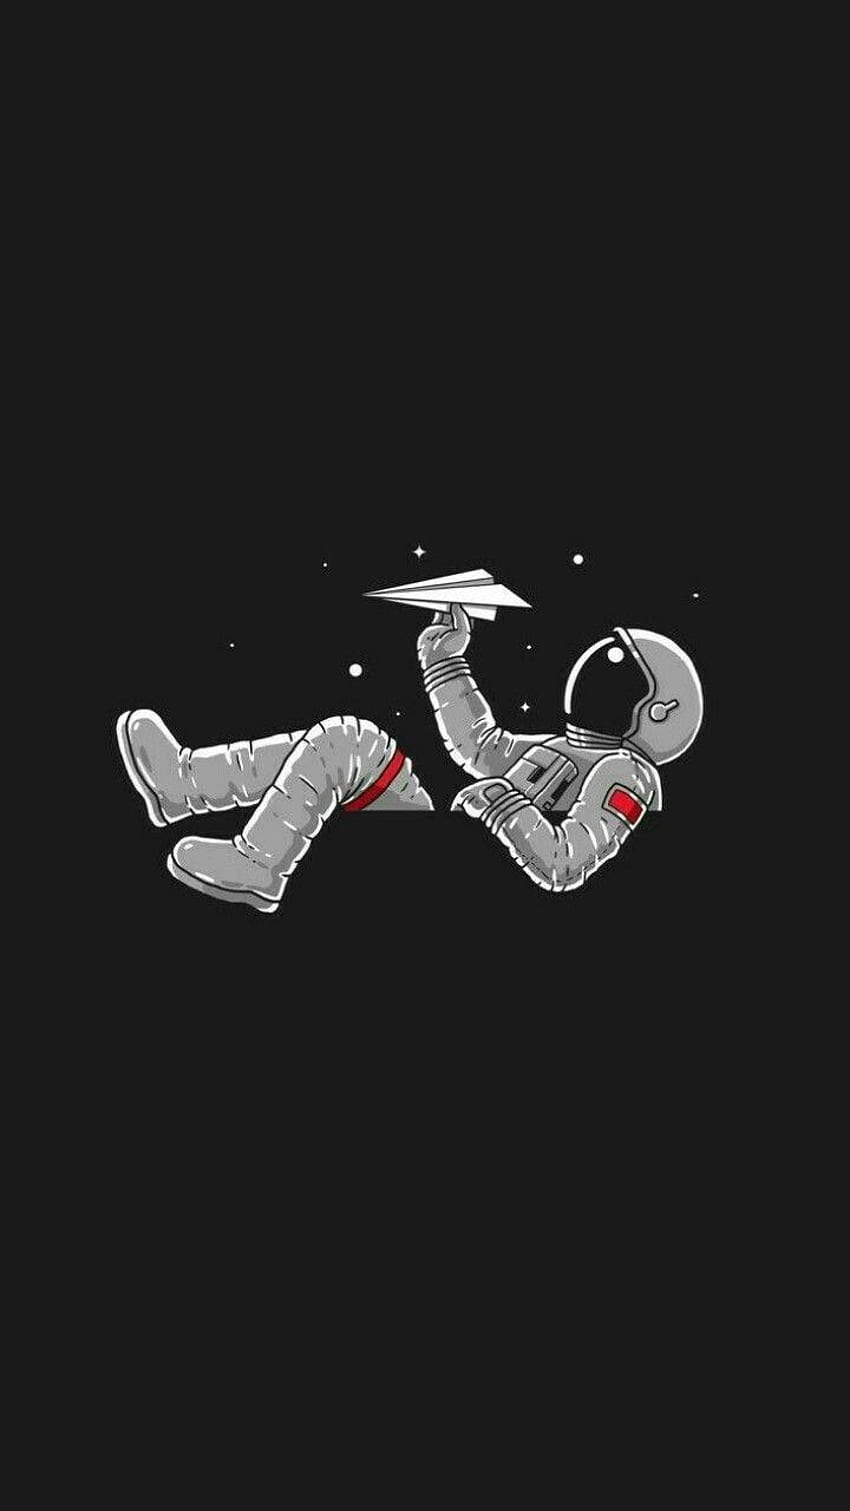 Black Mobile : Top 30 Best Black Mobile Background, Falling Astronaut iPhone wallpaper ponsel HD